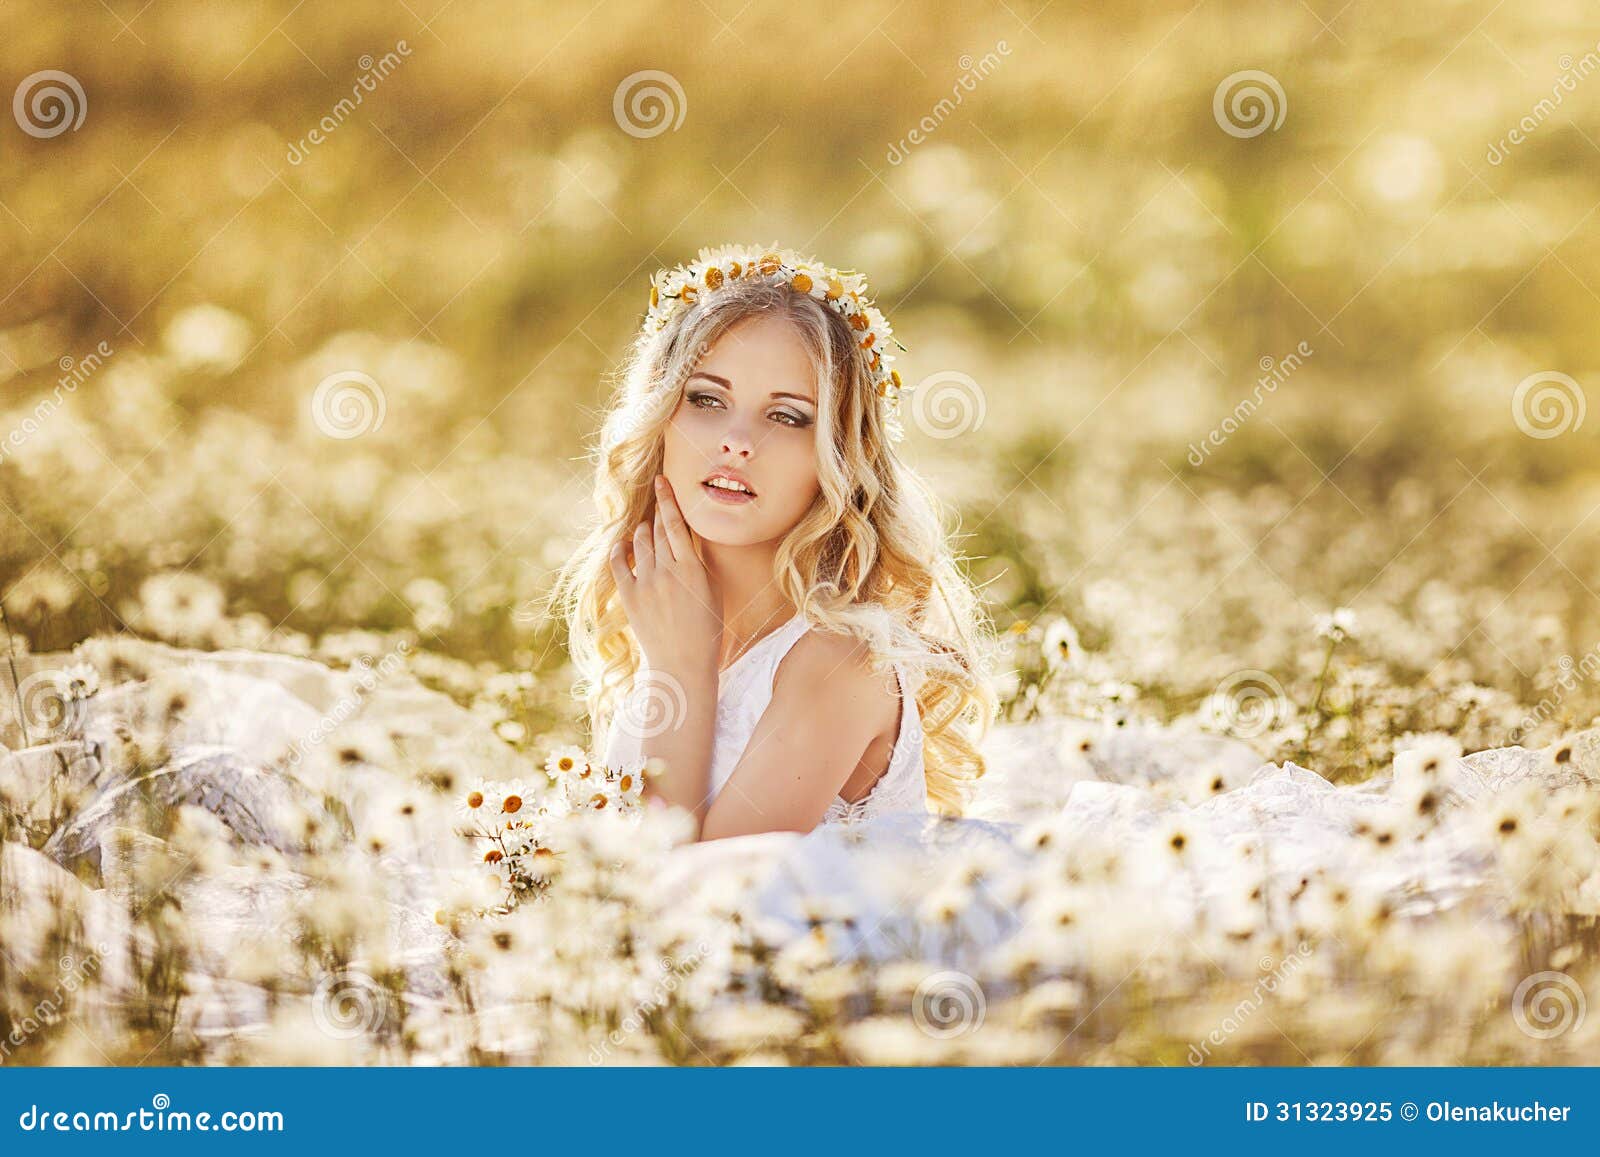 Beautiful bride in a field stock image. Image of enjoy - 31323925